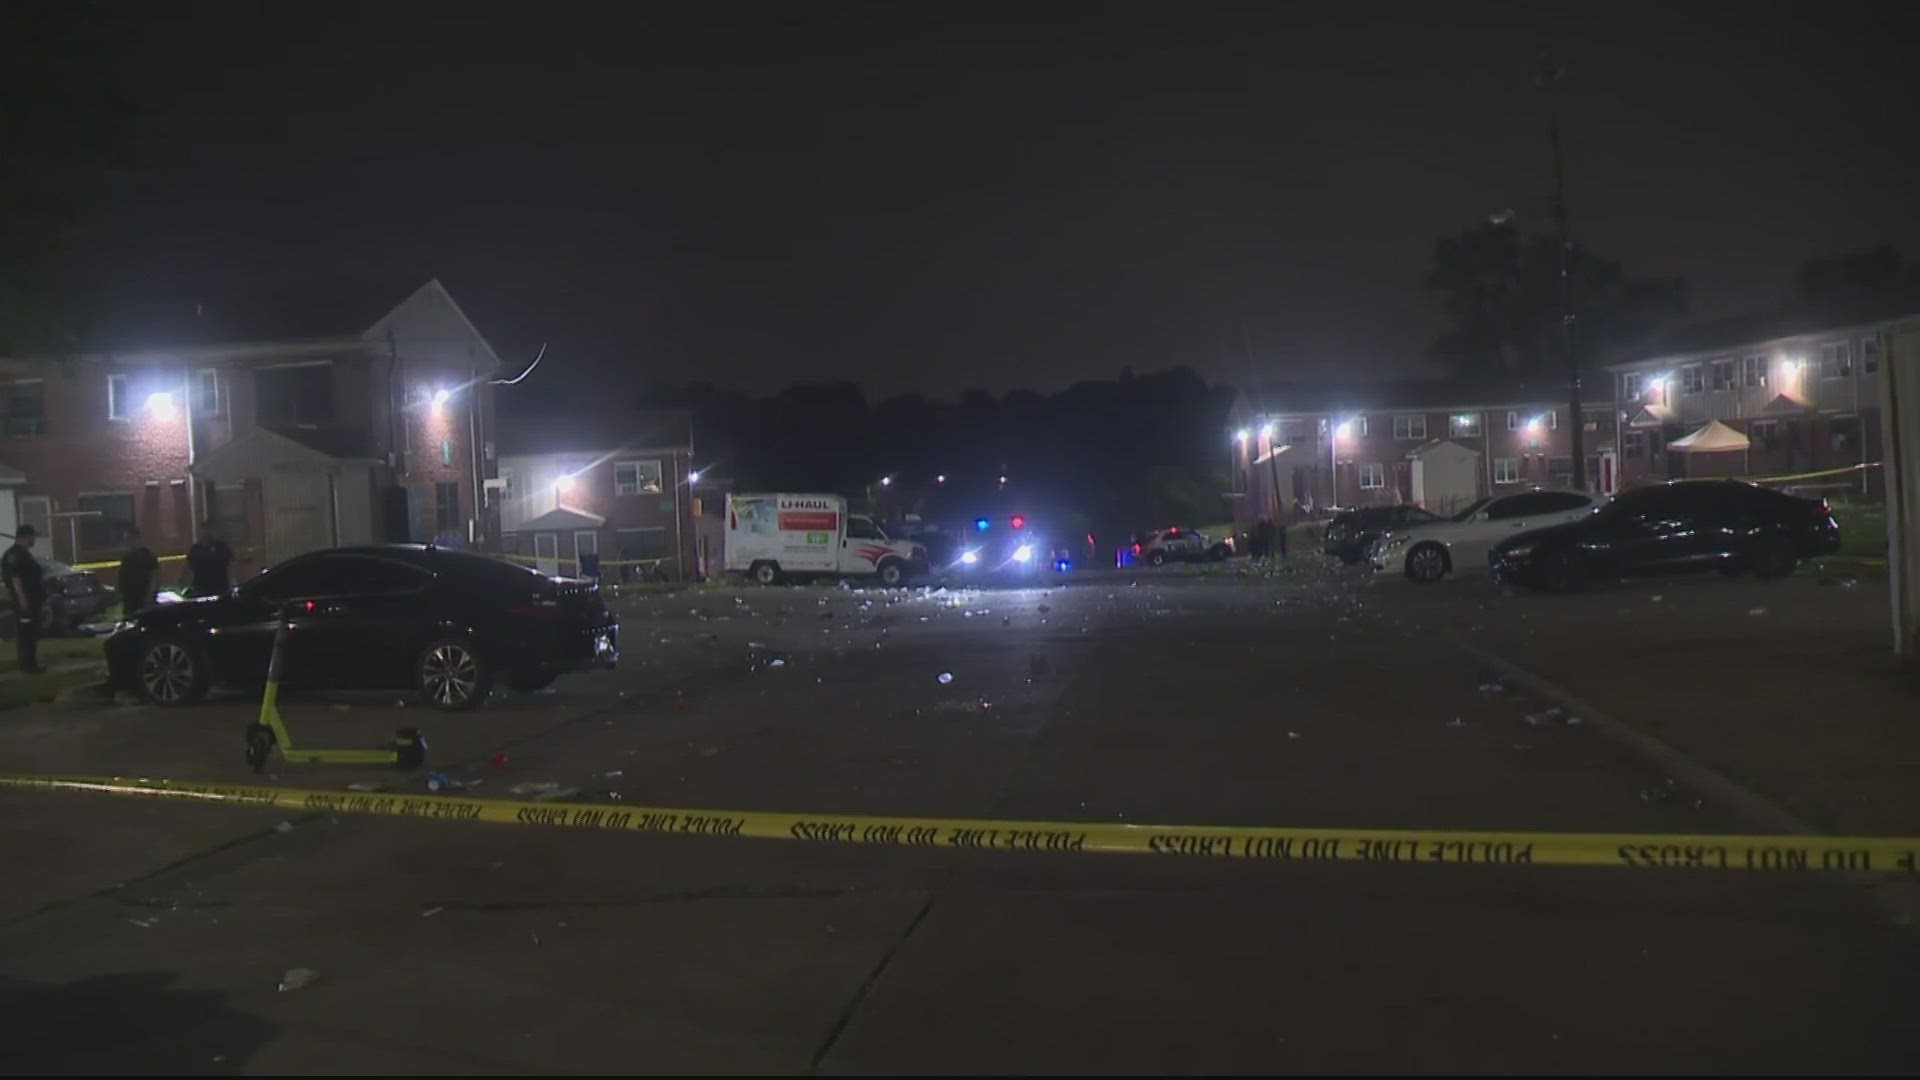 Police say a total of 30 people were shot. An 18-year-old woman and 20-year-old man were killed and three others are in critical condition.